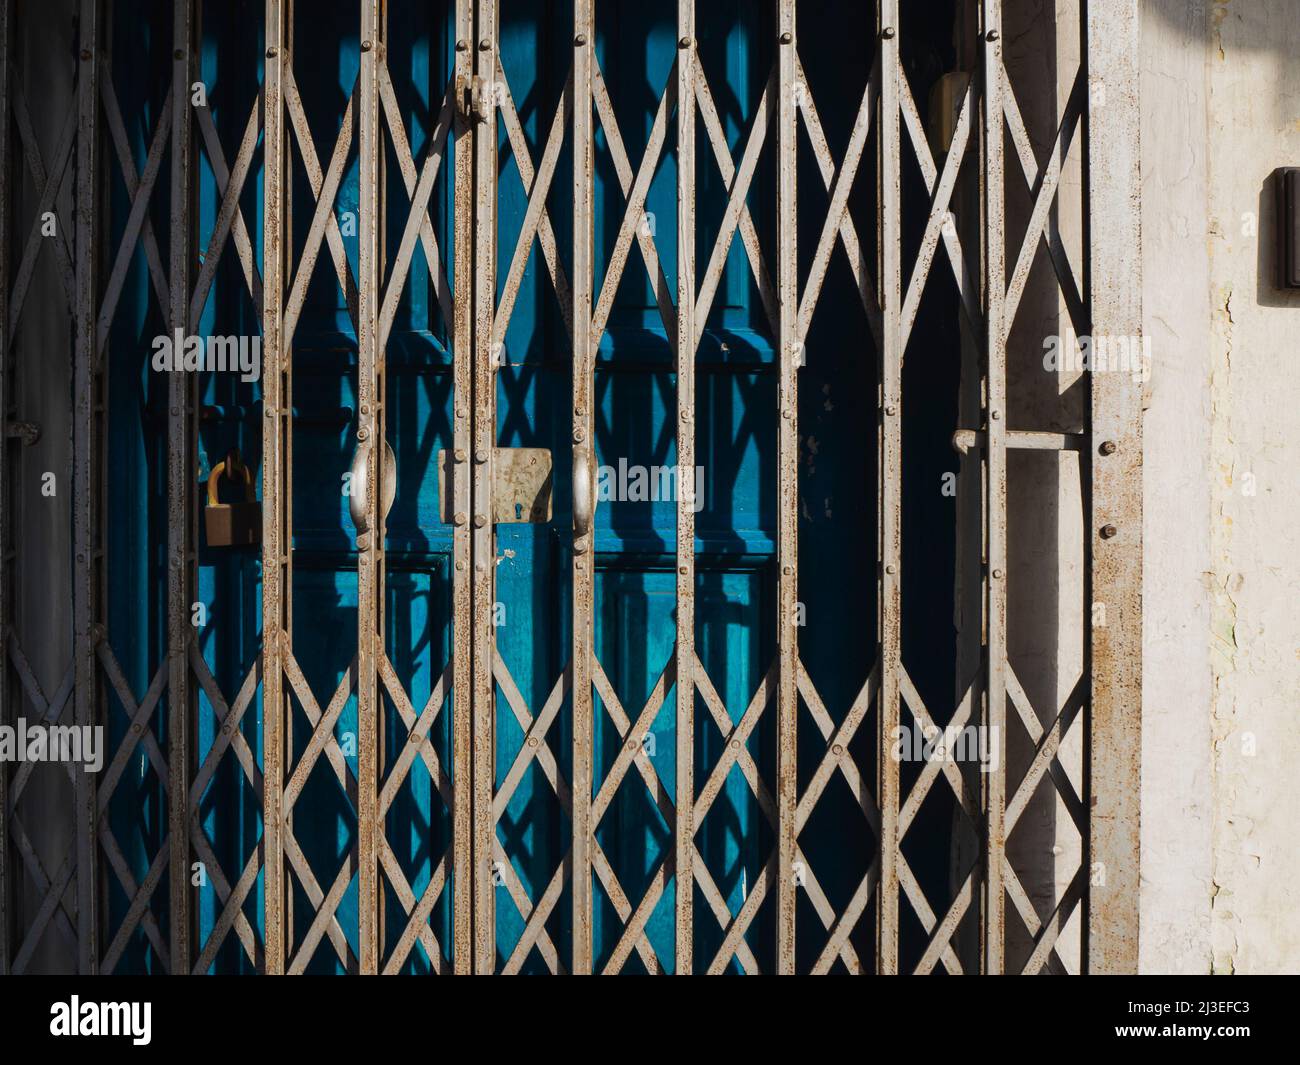 An old, rusty metal grill gate in front of blue wooden doors Stock Photo